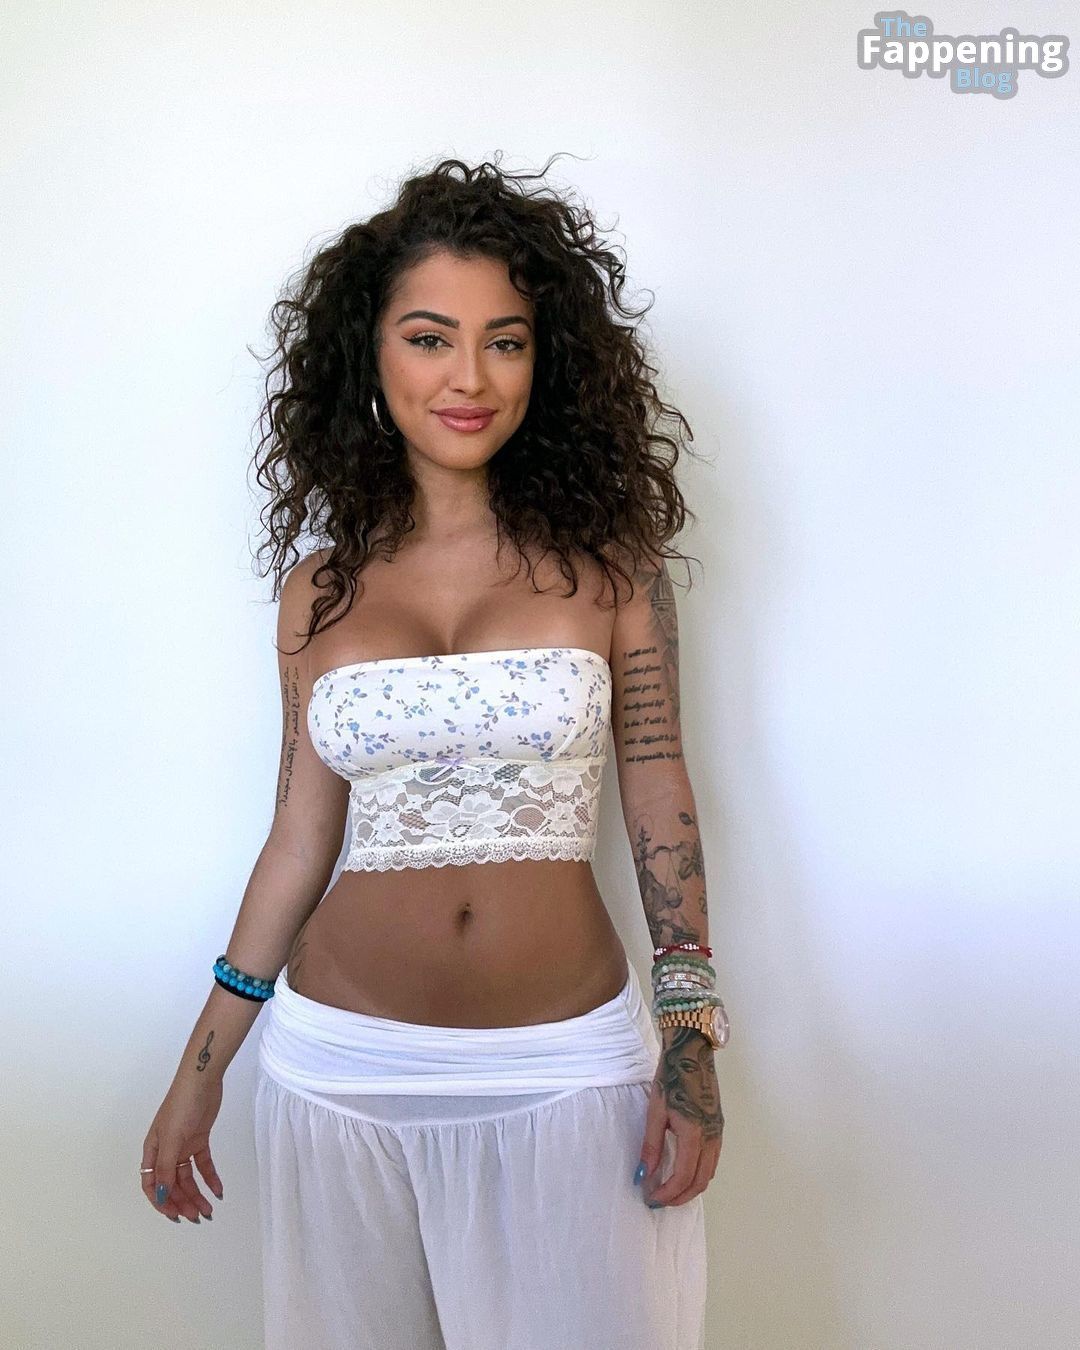 Alluring-Malu-Trevejo-Boobs-and-Cleavage-6-thefappeningblog.com_.jpg